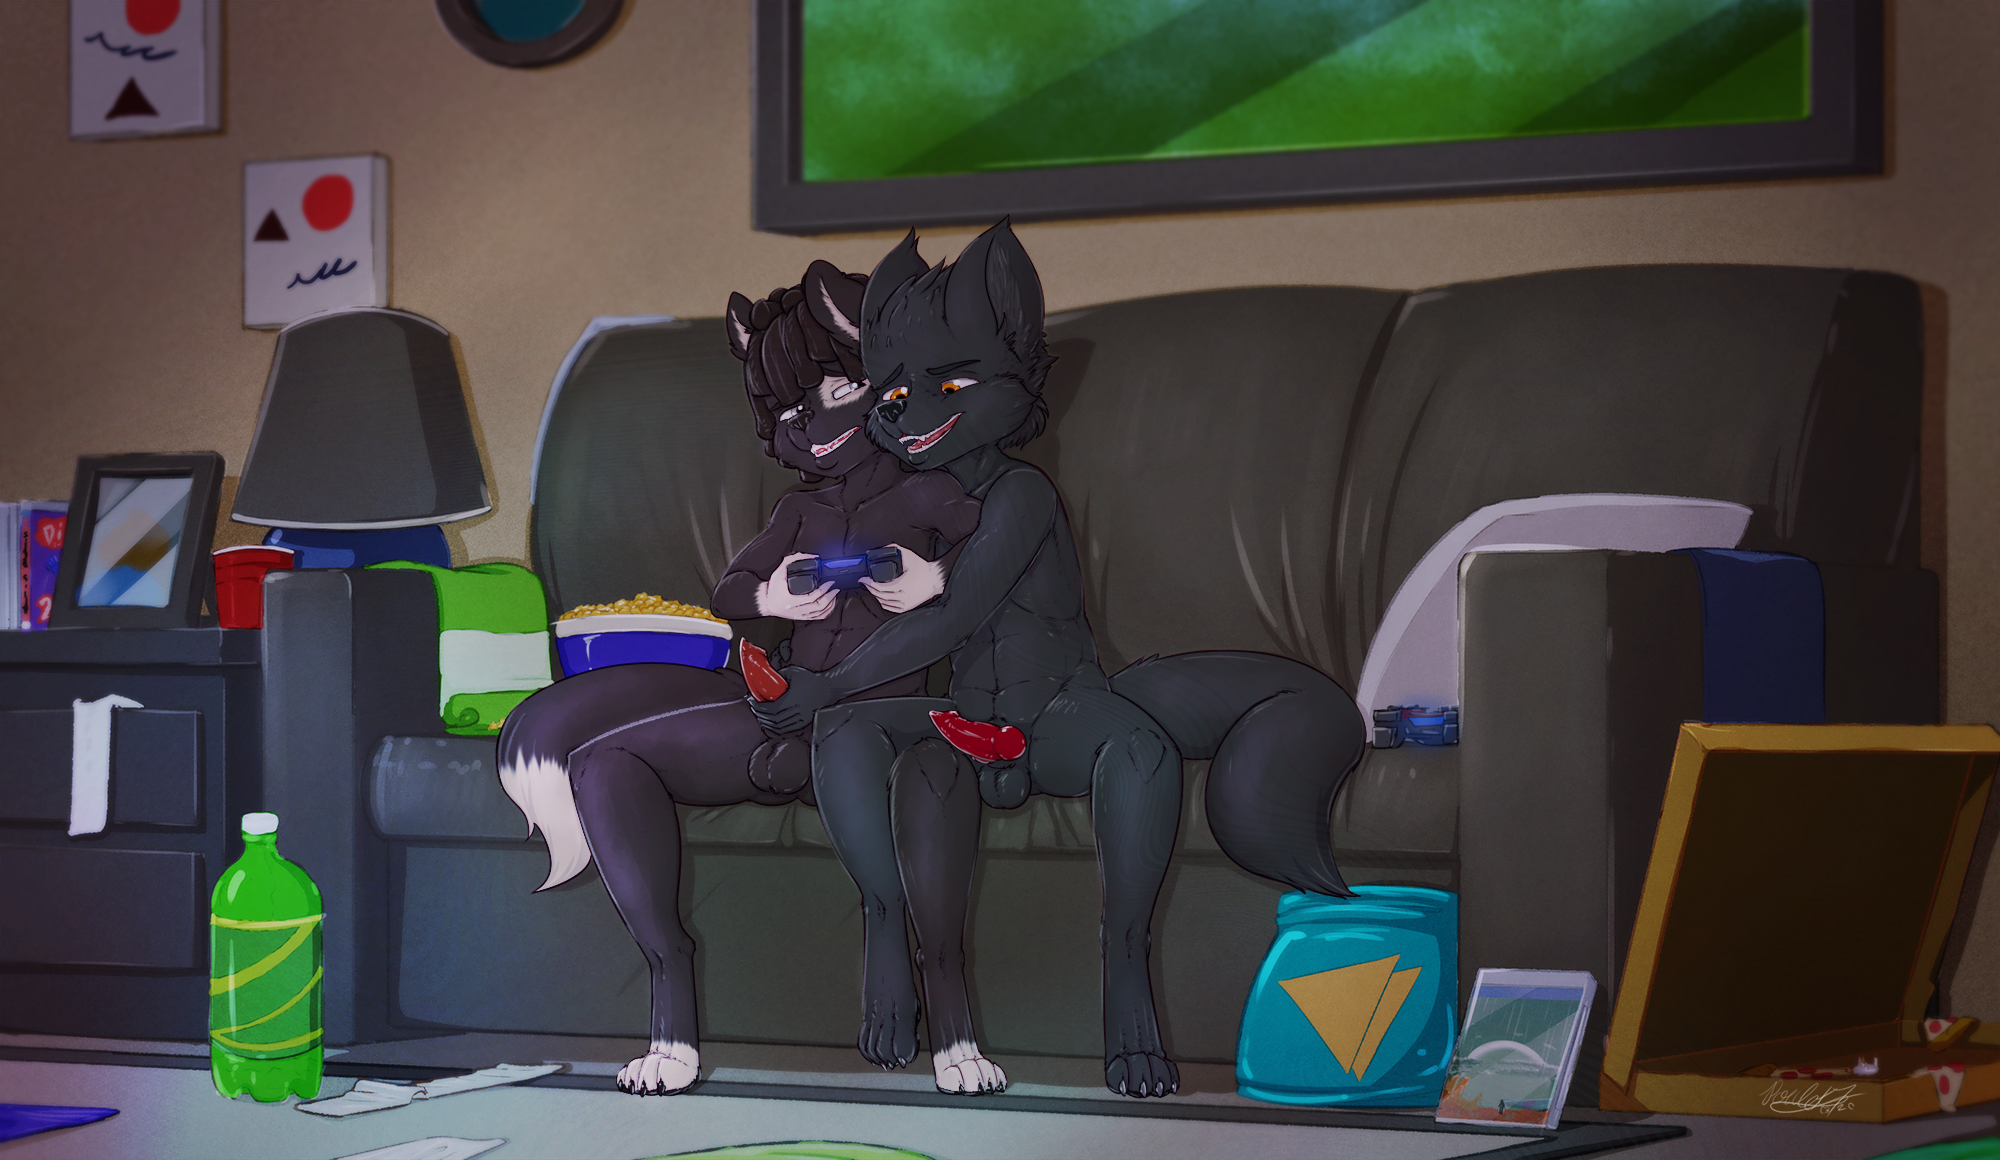 3043997_DiegoandFriends_lielong_couch_commission_01_sd